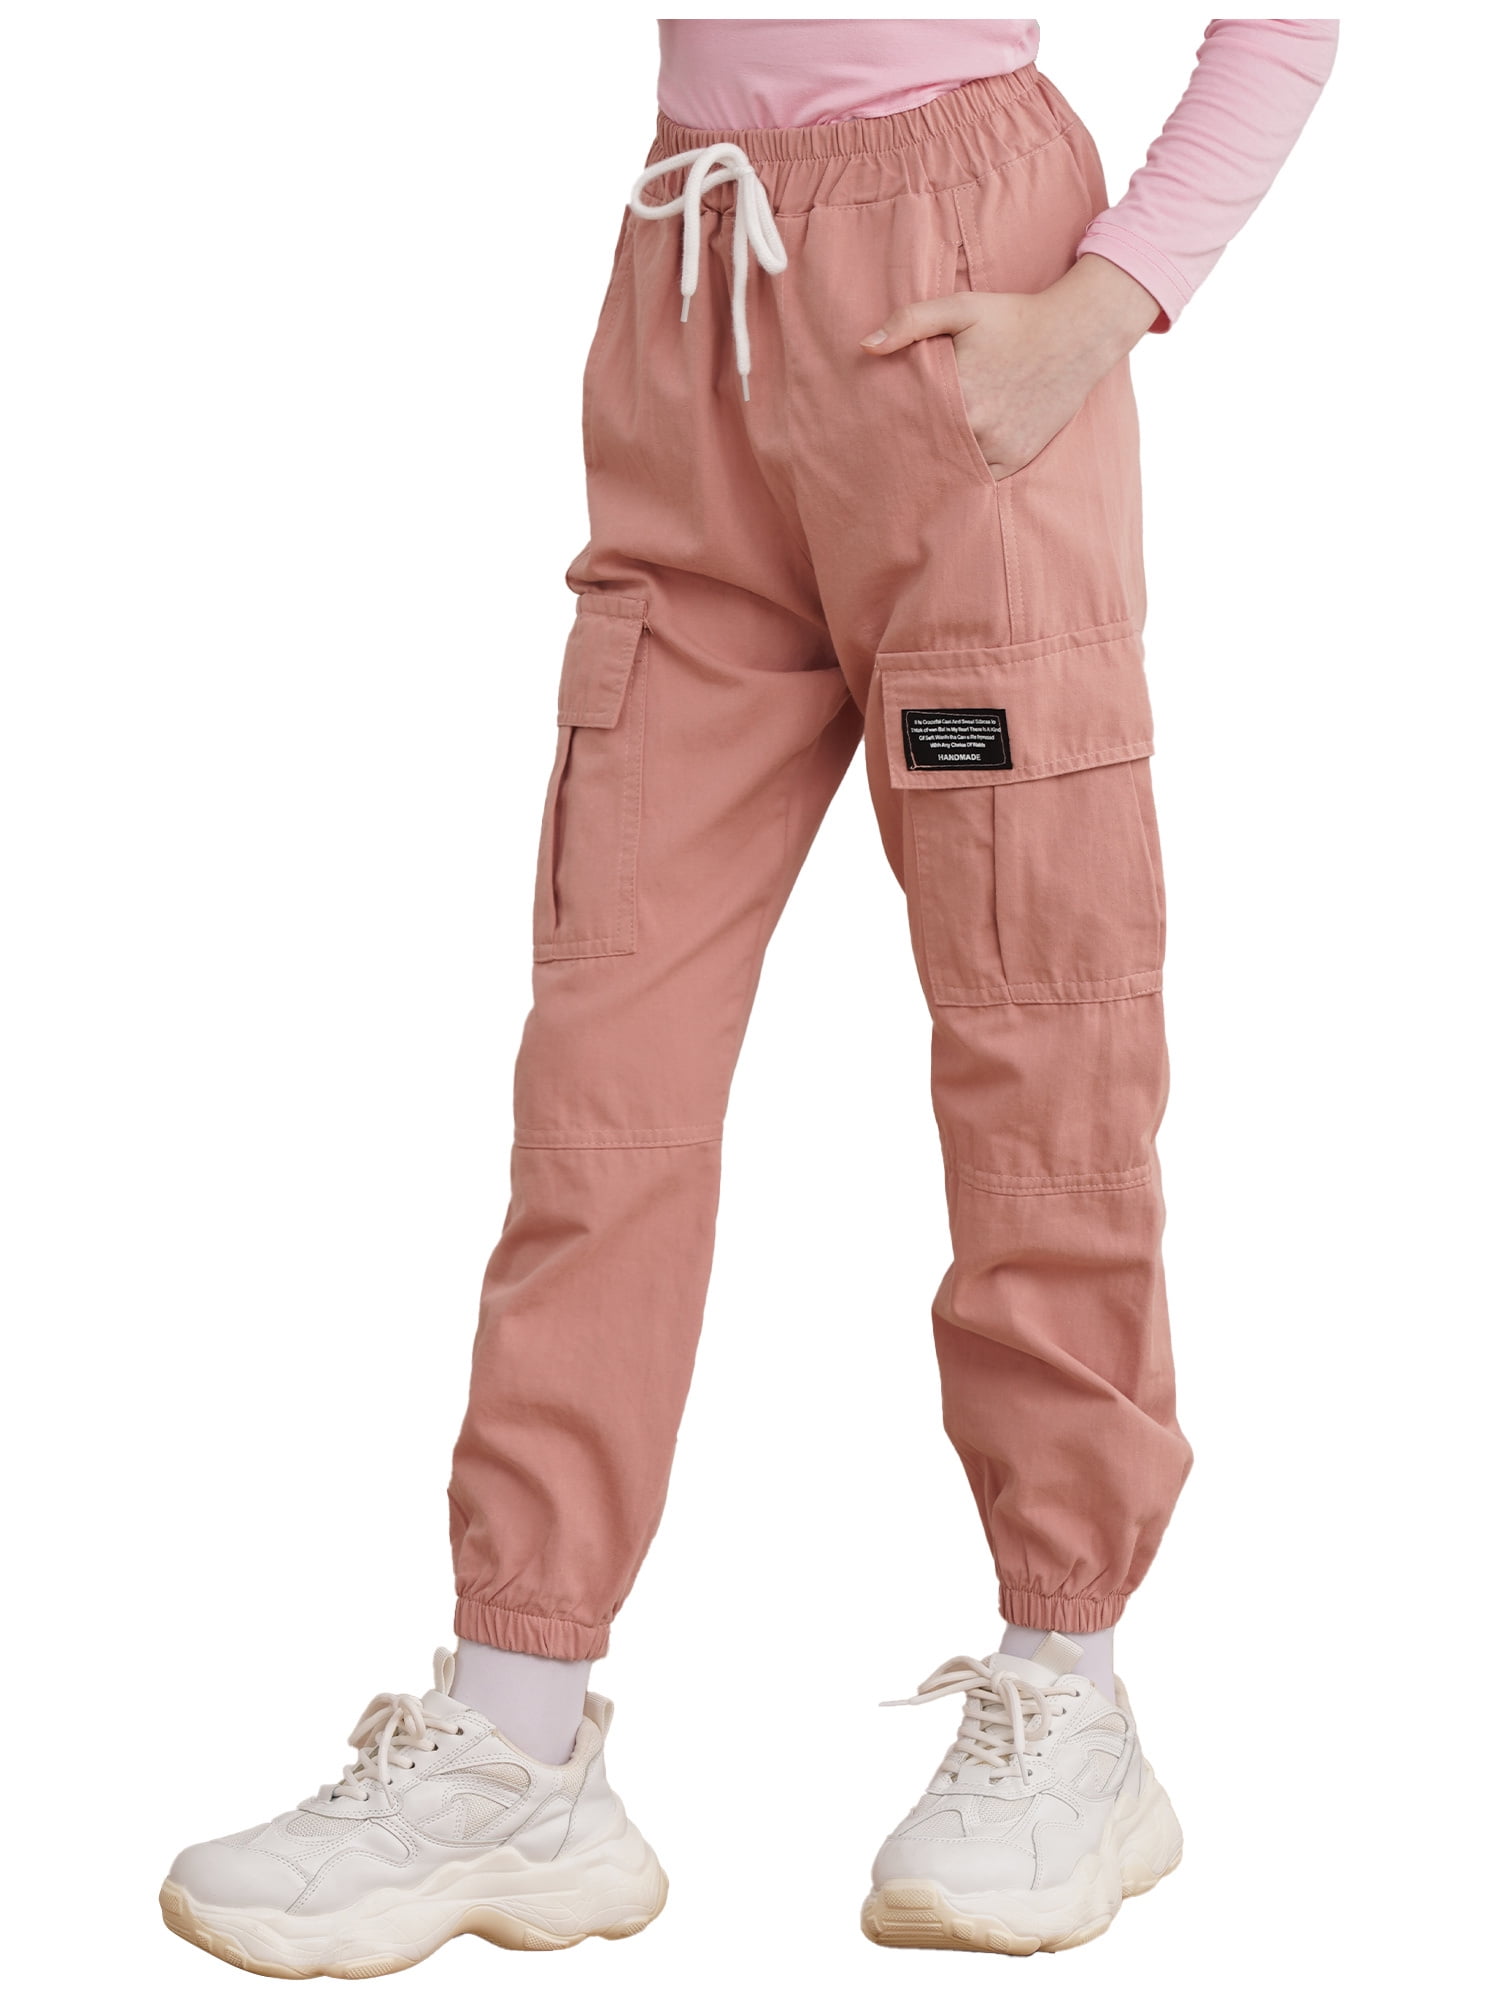 AOWKULAE Girls & Women's Casual Cargo Jogger Pants, 3T - Women 2XL, Z-pink,  XX-Large : Buy Online at Best Price in KSA - Souq is now : Fashion